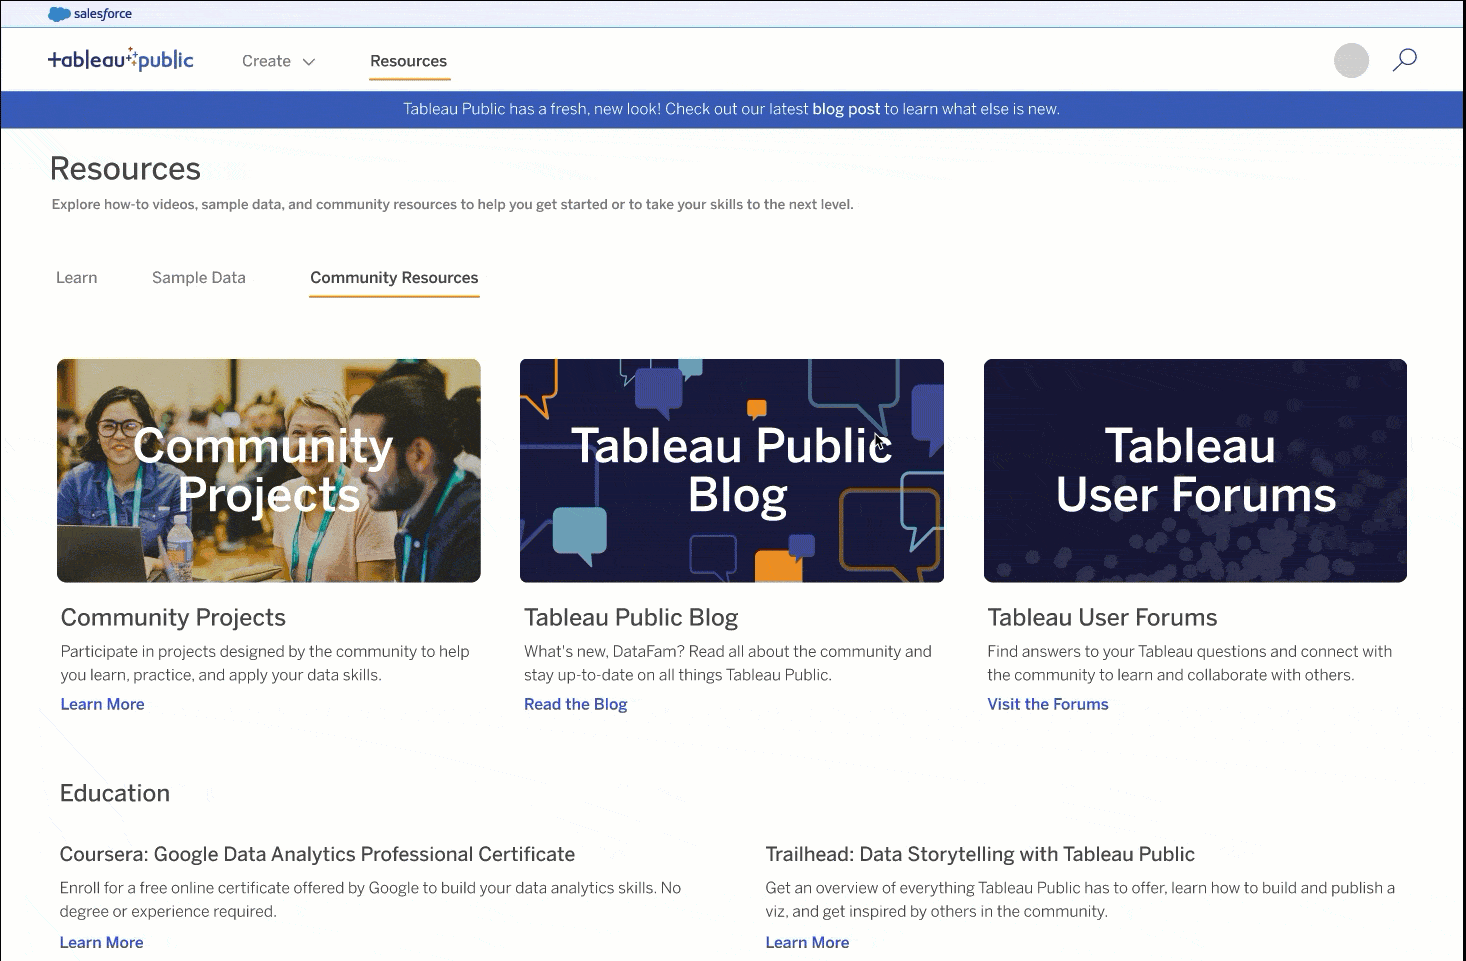 re-viz-it-the-tableau-public-homepage-to-discover-what-s-new